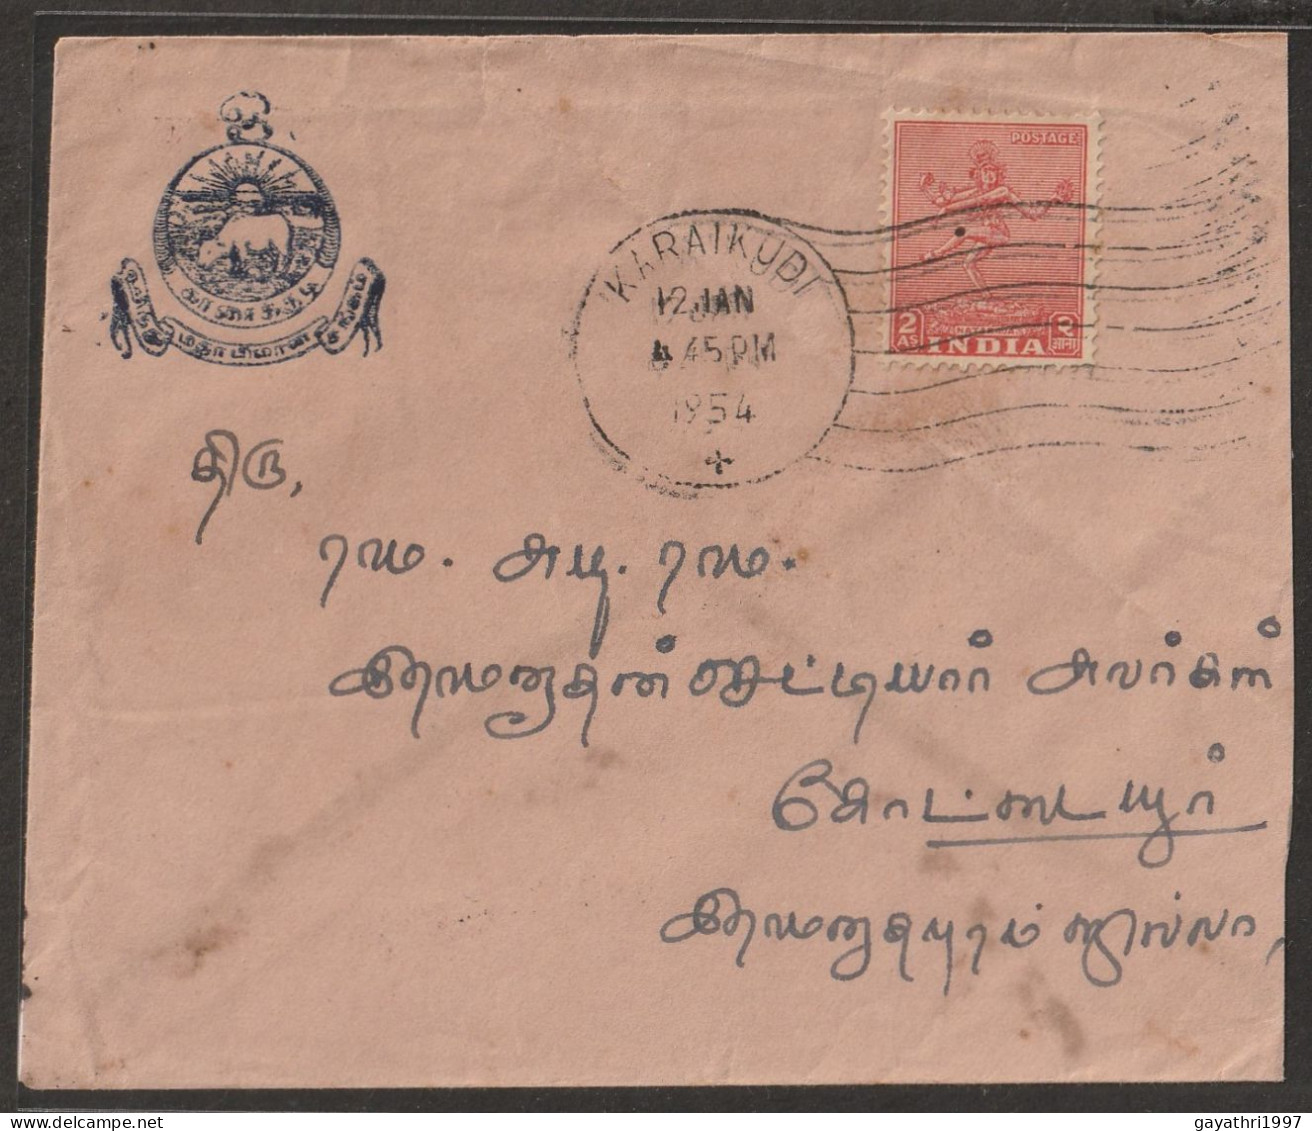 India 1954 Nataraja Stamp On Cover From Hindu Mathabane Sanga With Machine Cancellation To Party's(a184) - Induismo